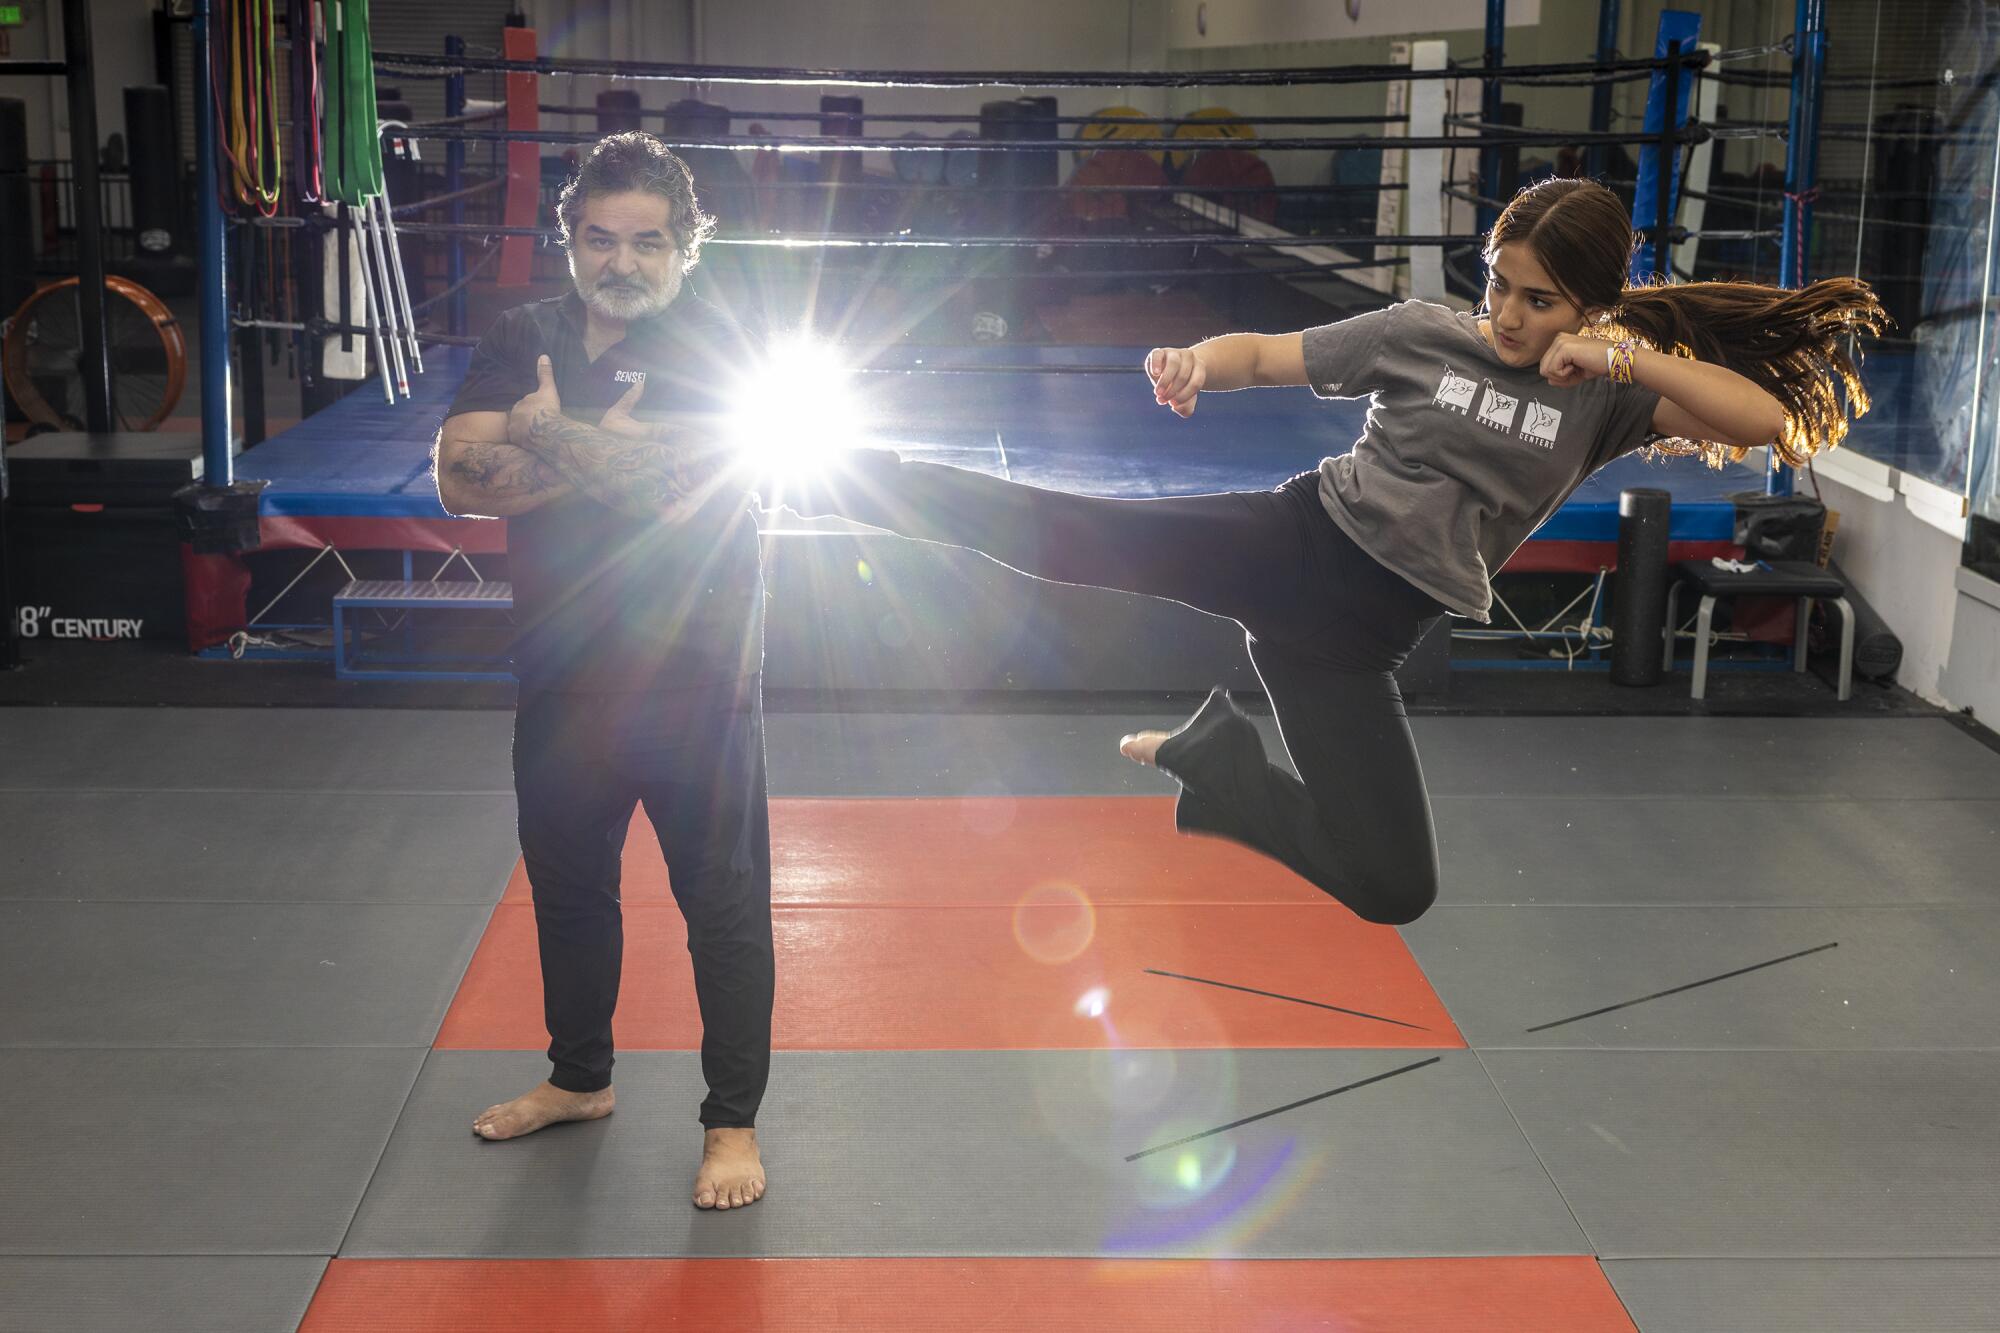 A woman does a jumping kick in the air next to a man in a dojo as sunlight enters the building.